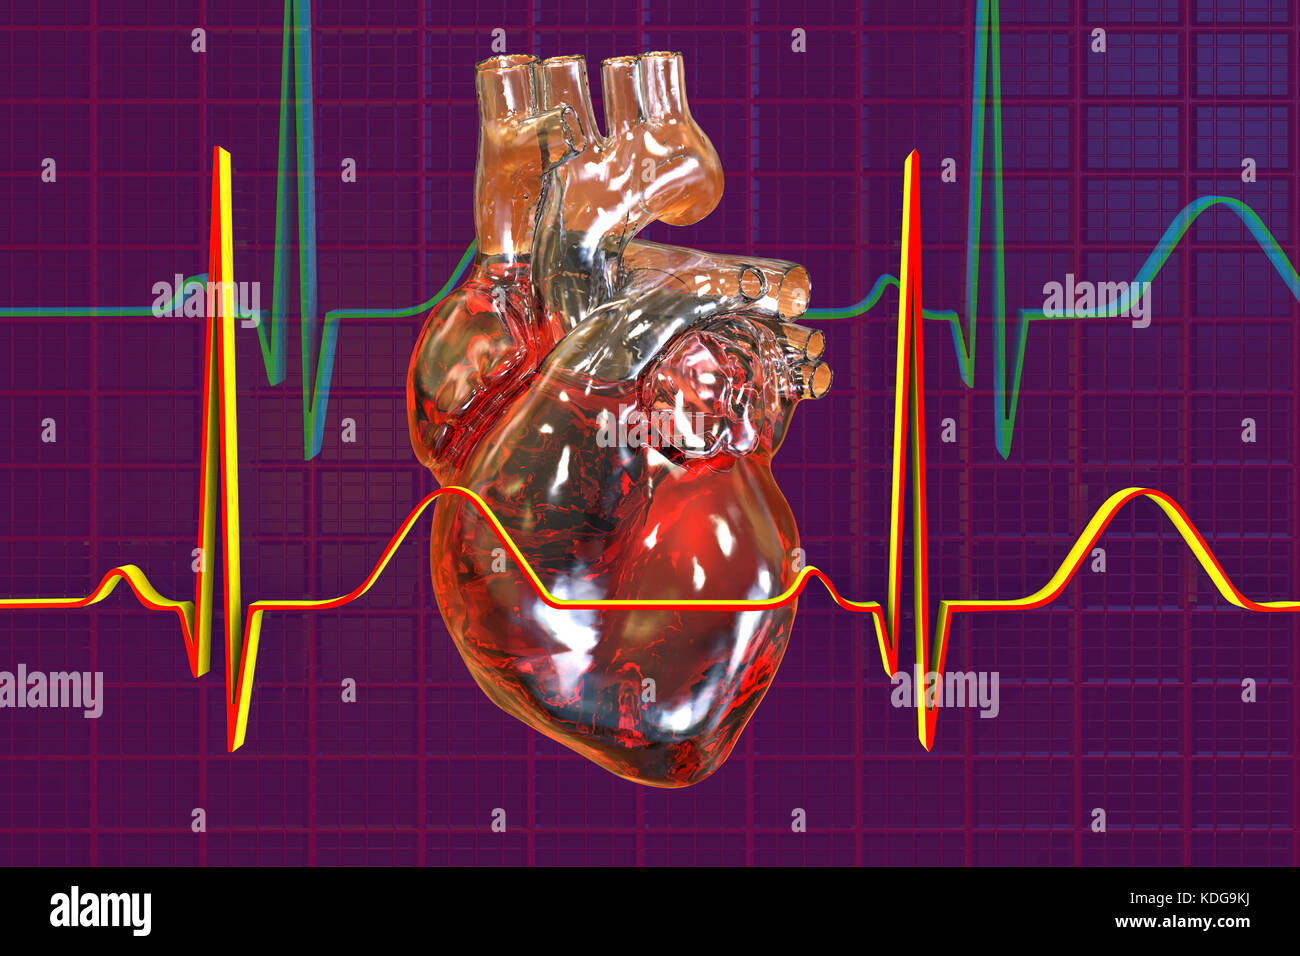 Computer illustration of the heart with coronary vessels and electrocardiogram (ECG). Stock Photo